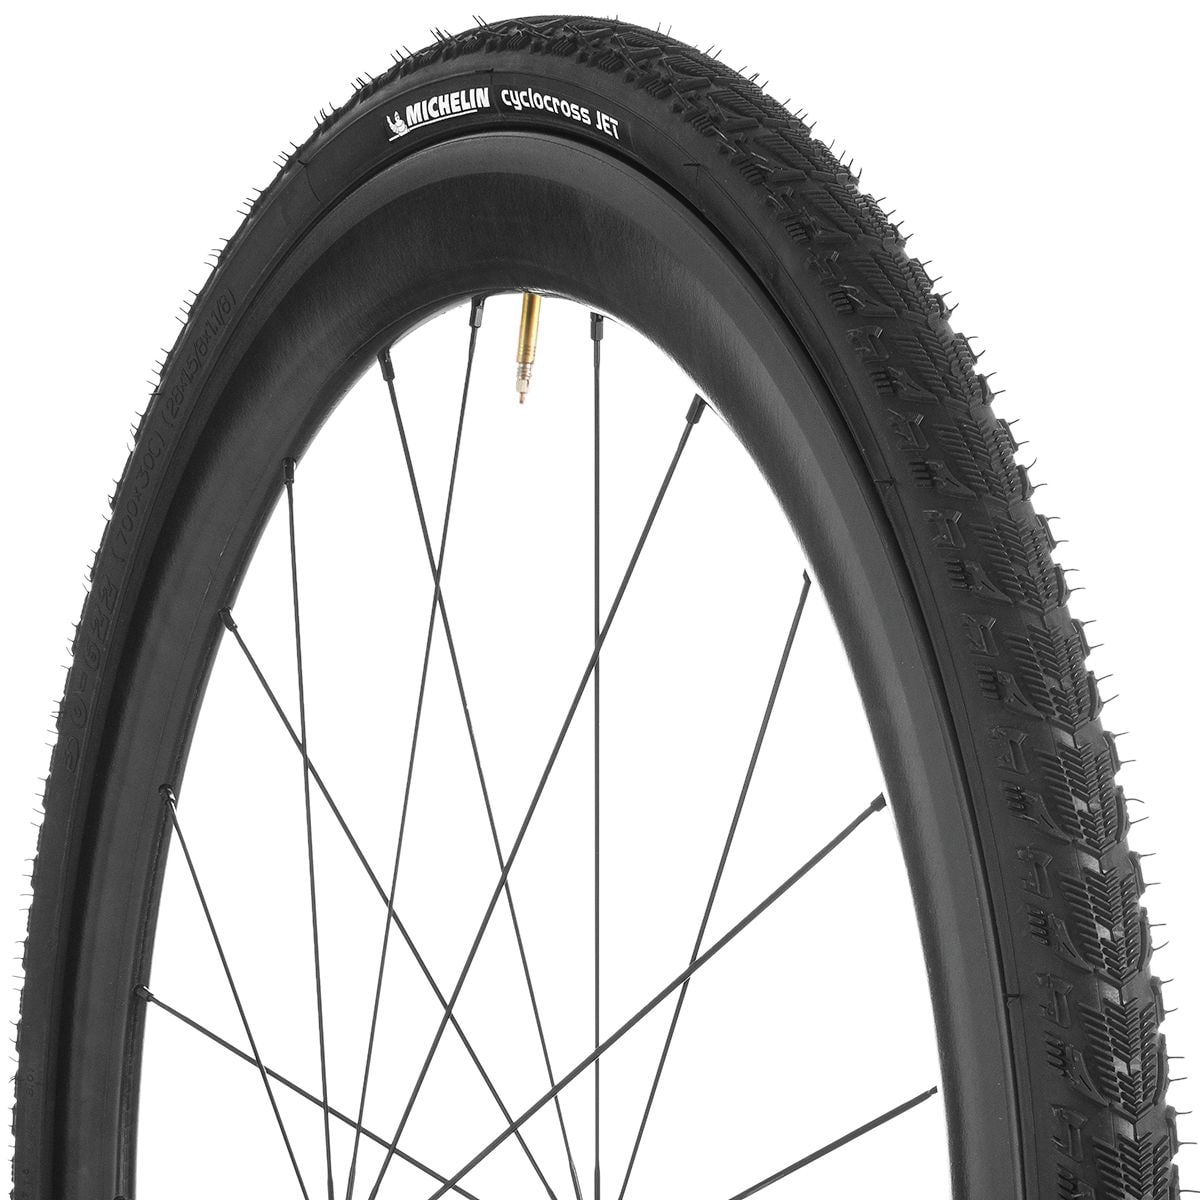 Michelin Cyclocross Jet S Tire Clincher